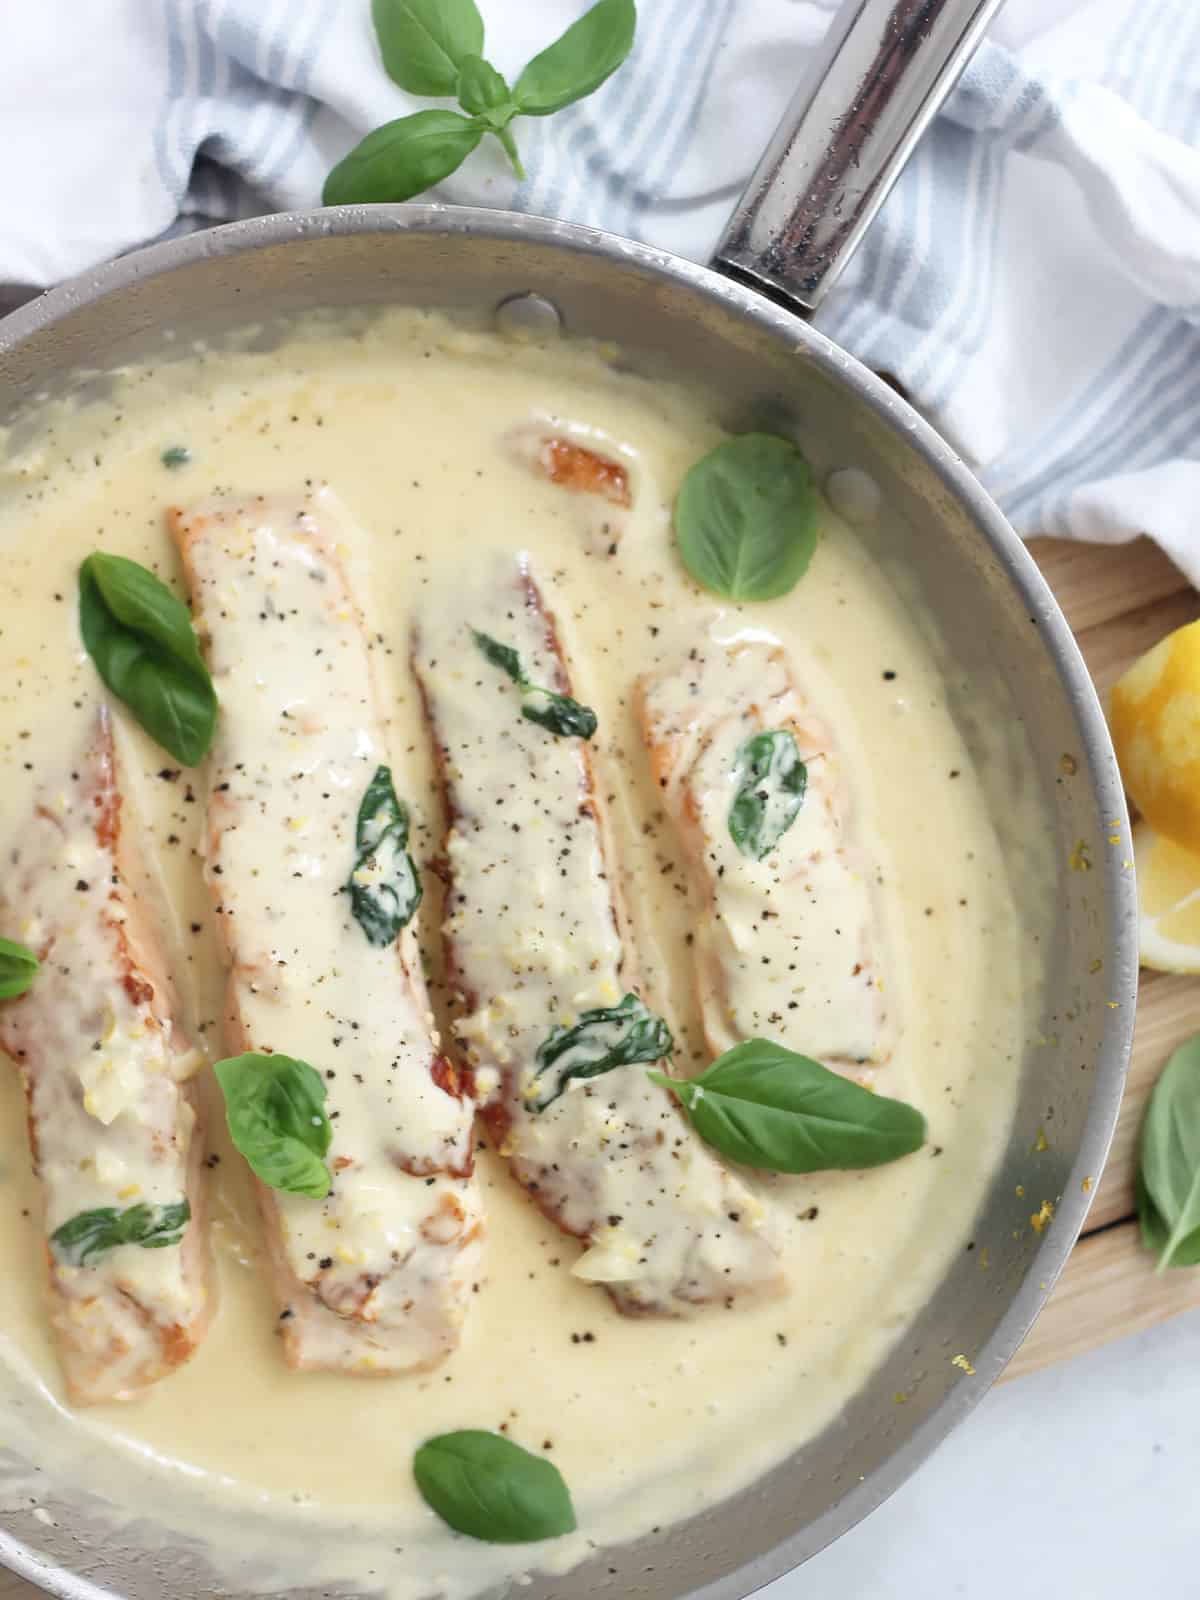 Salmon fillets in a skillet with a cream sauce spooned over the top.